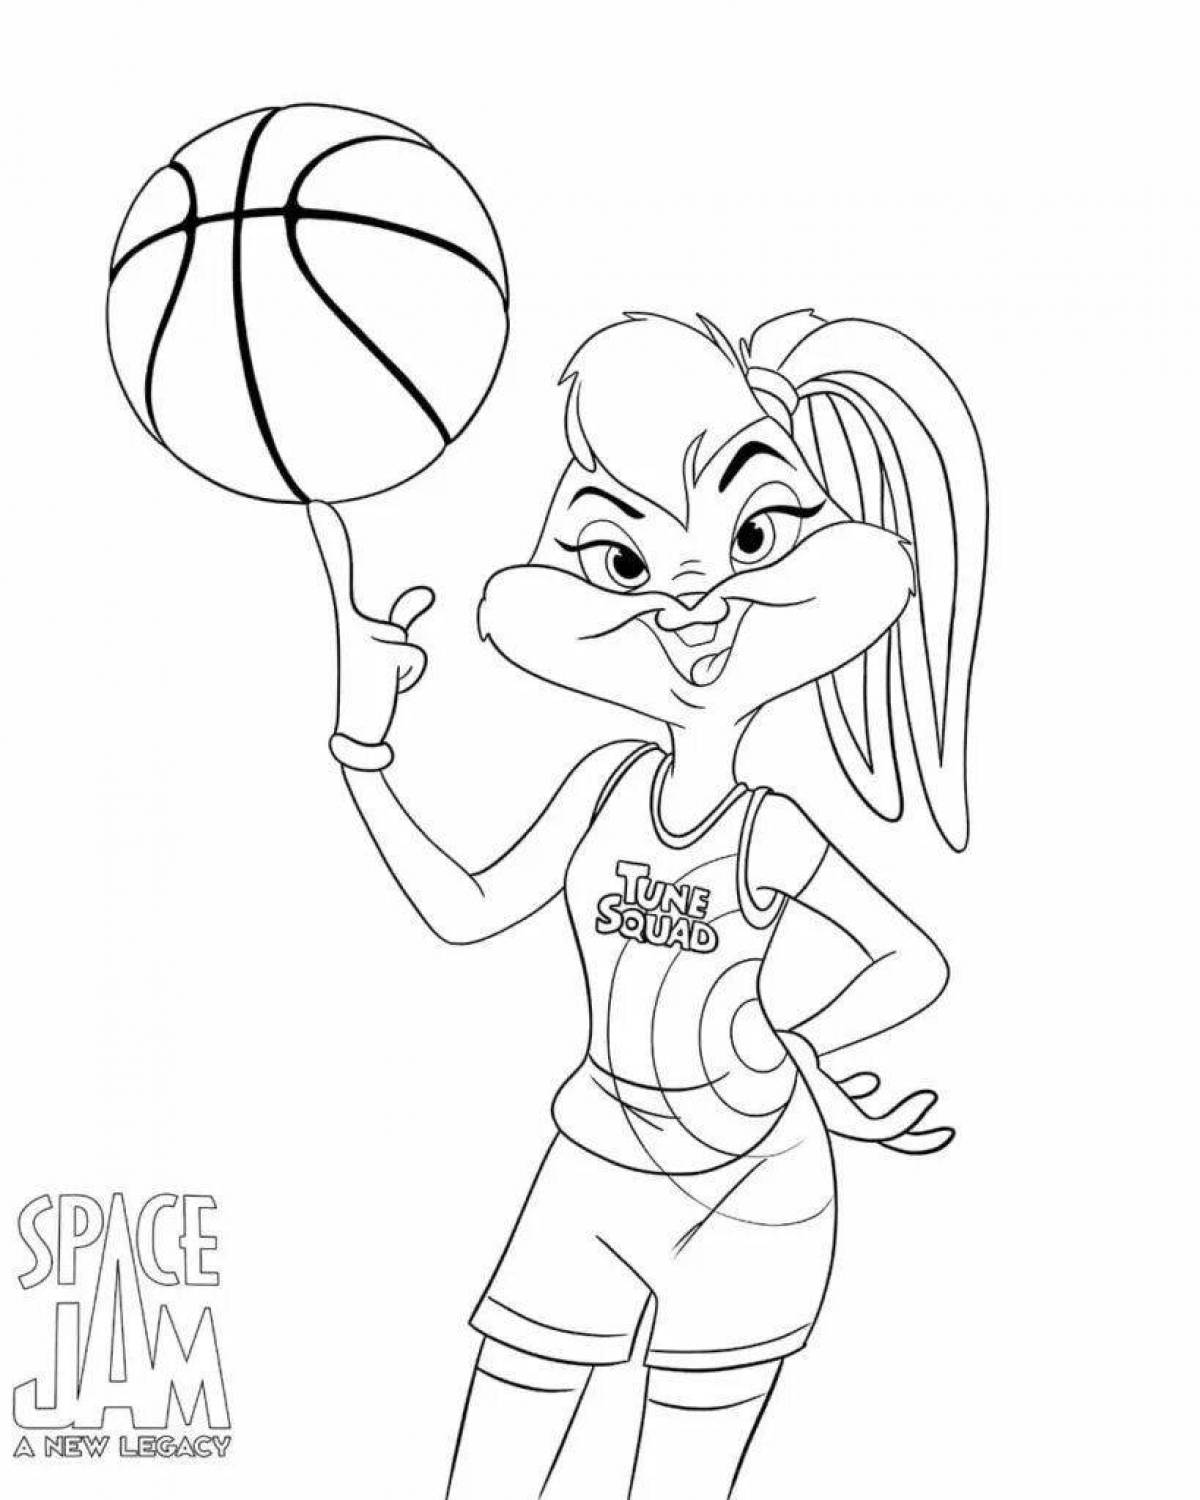 Zany space jam coloring book